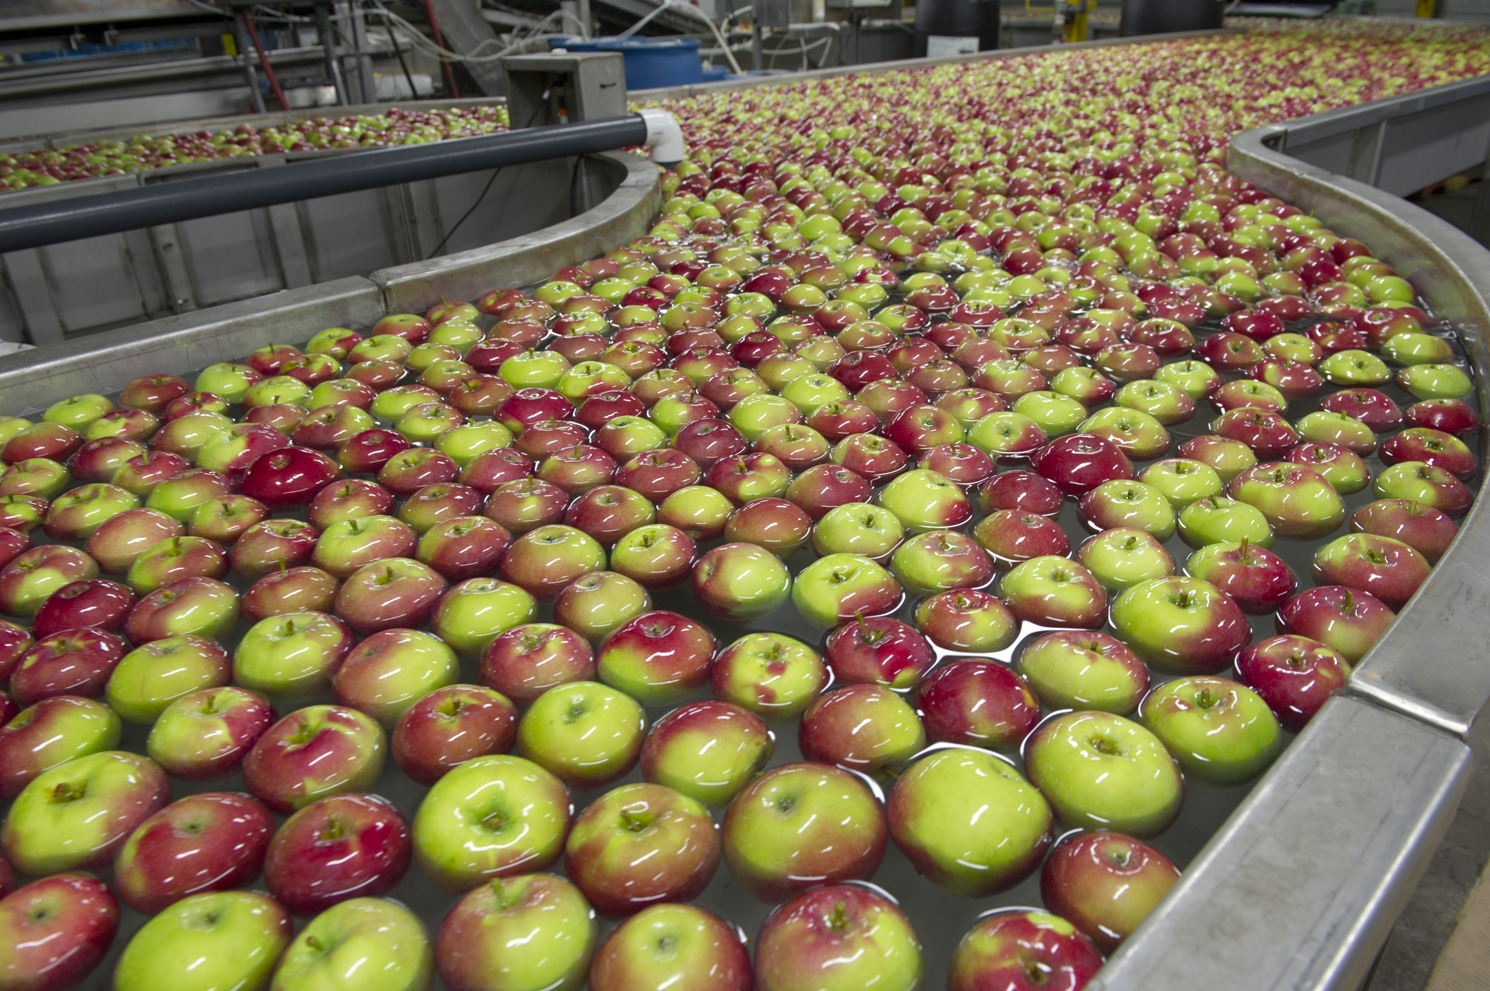 Apples are washed after they arrive at the Norfolk Fruit Growersâ€™ facility  - then theyâ€™ll be packed ready for market.